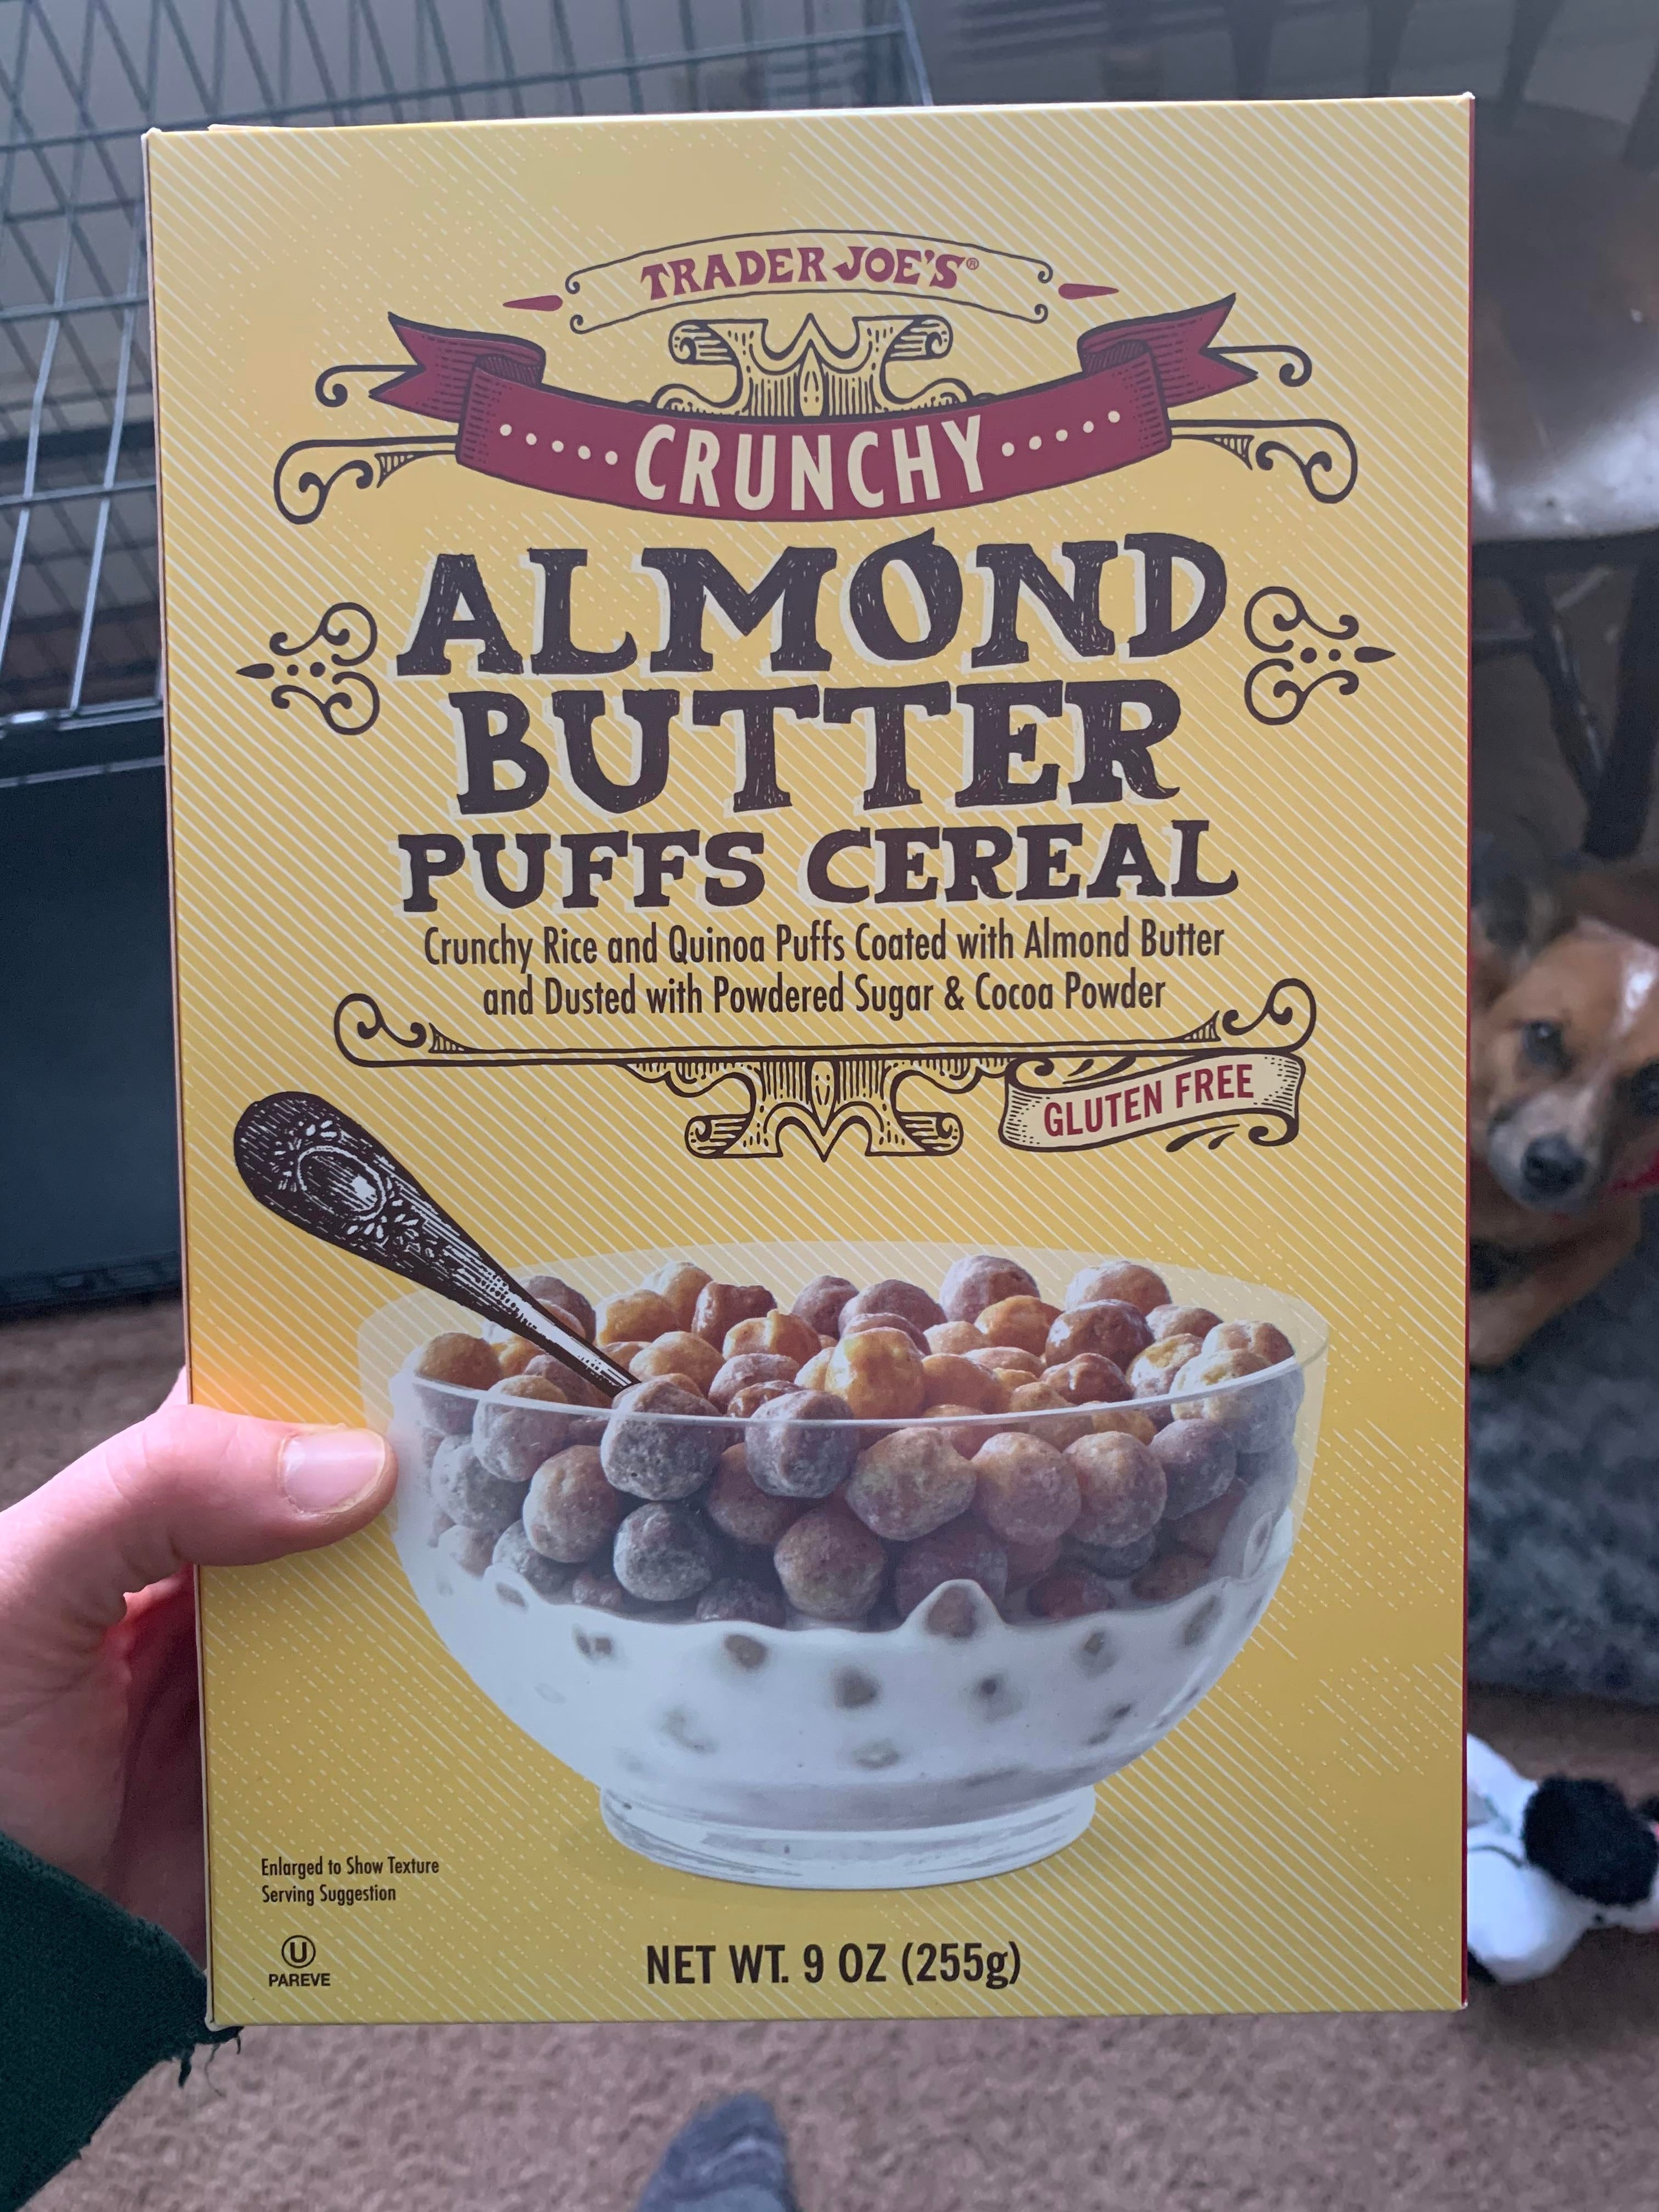 A box of almond butter crunch cereal.